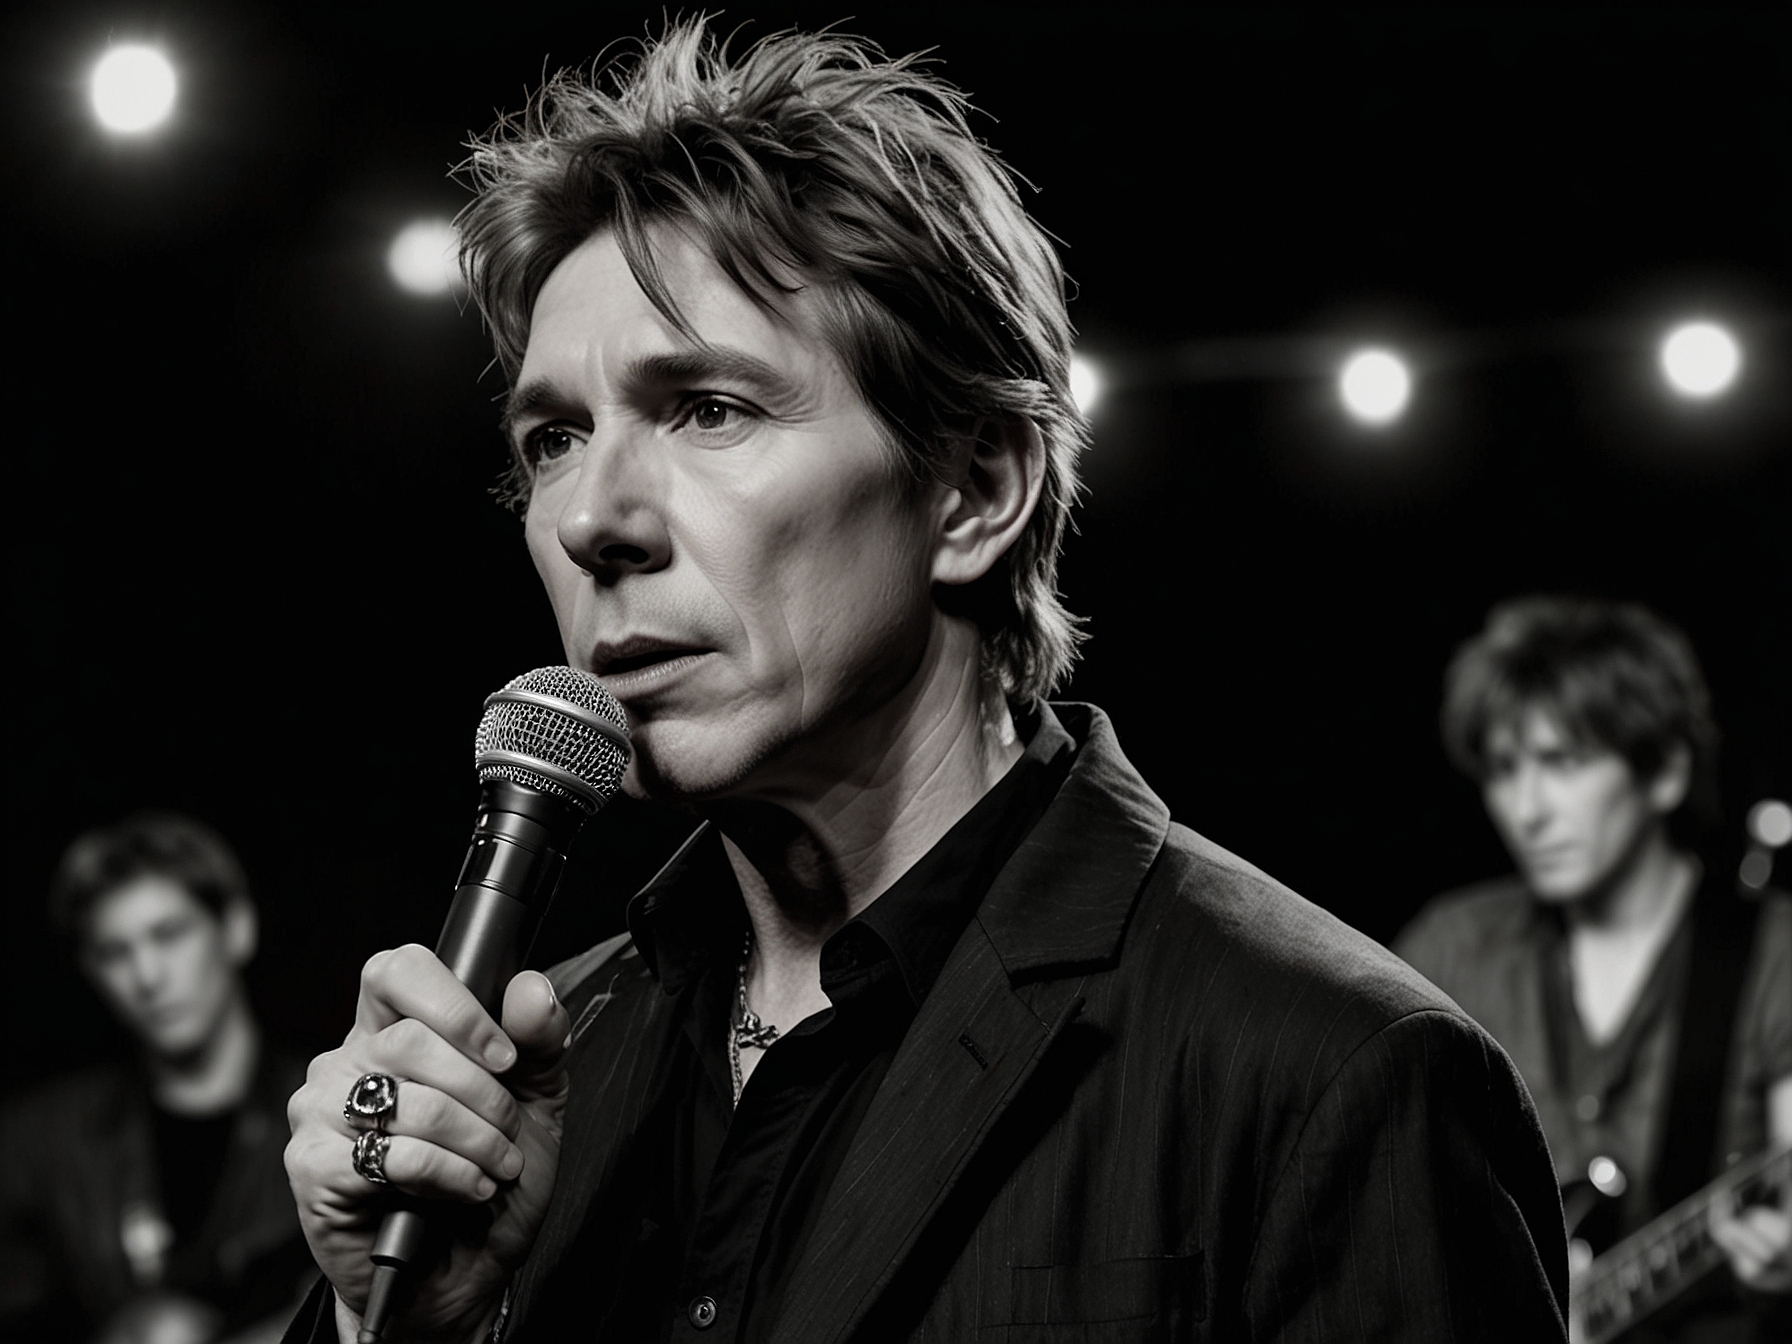 The Psychedelic Furs captivating the audience with Richard Butler's unique vocal delivery and the band's rich, layered sound during a live performance, evoking nostalgic vibes.